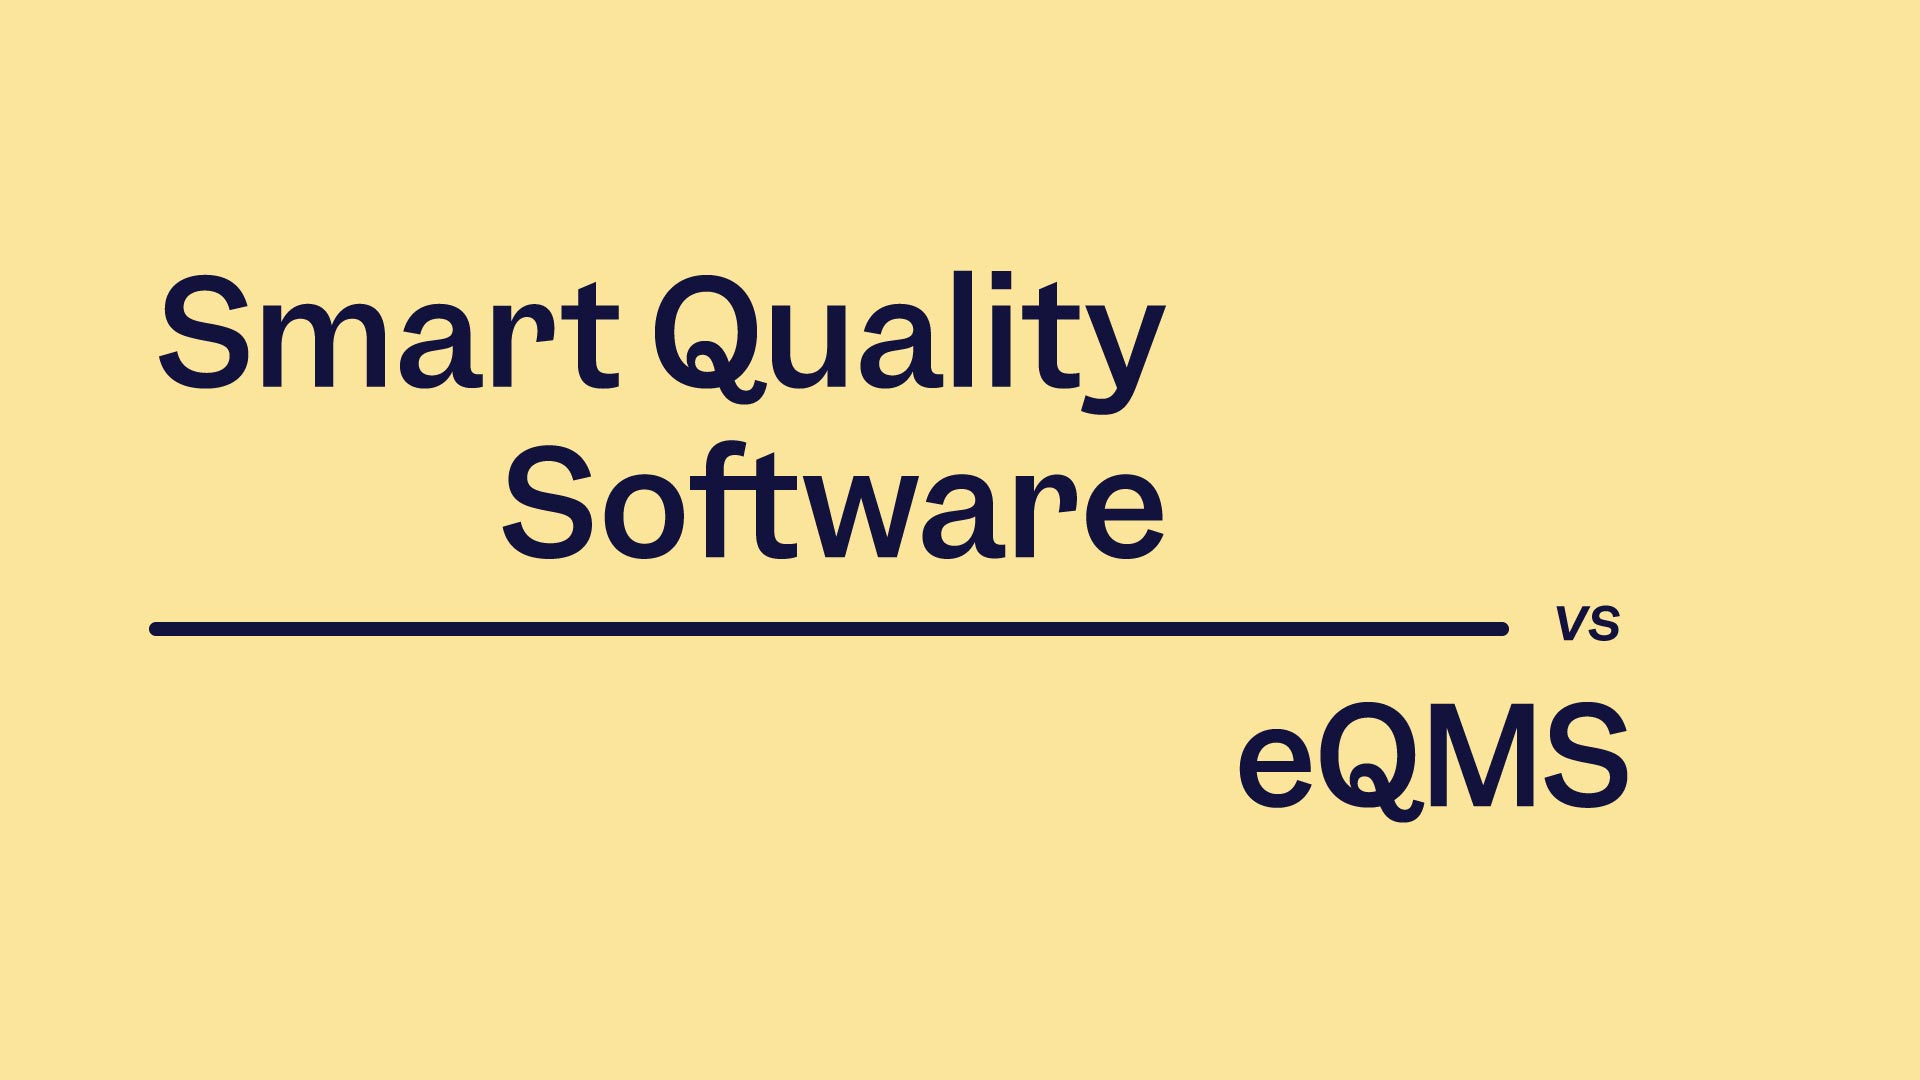 Smart Quality Software vs eQMS: What are the differences?